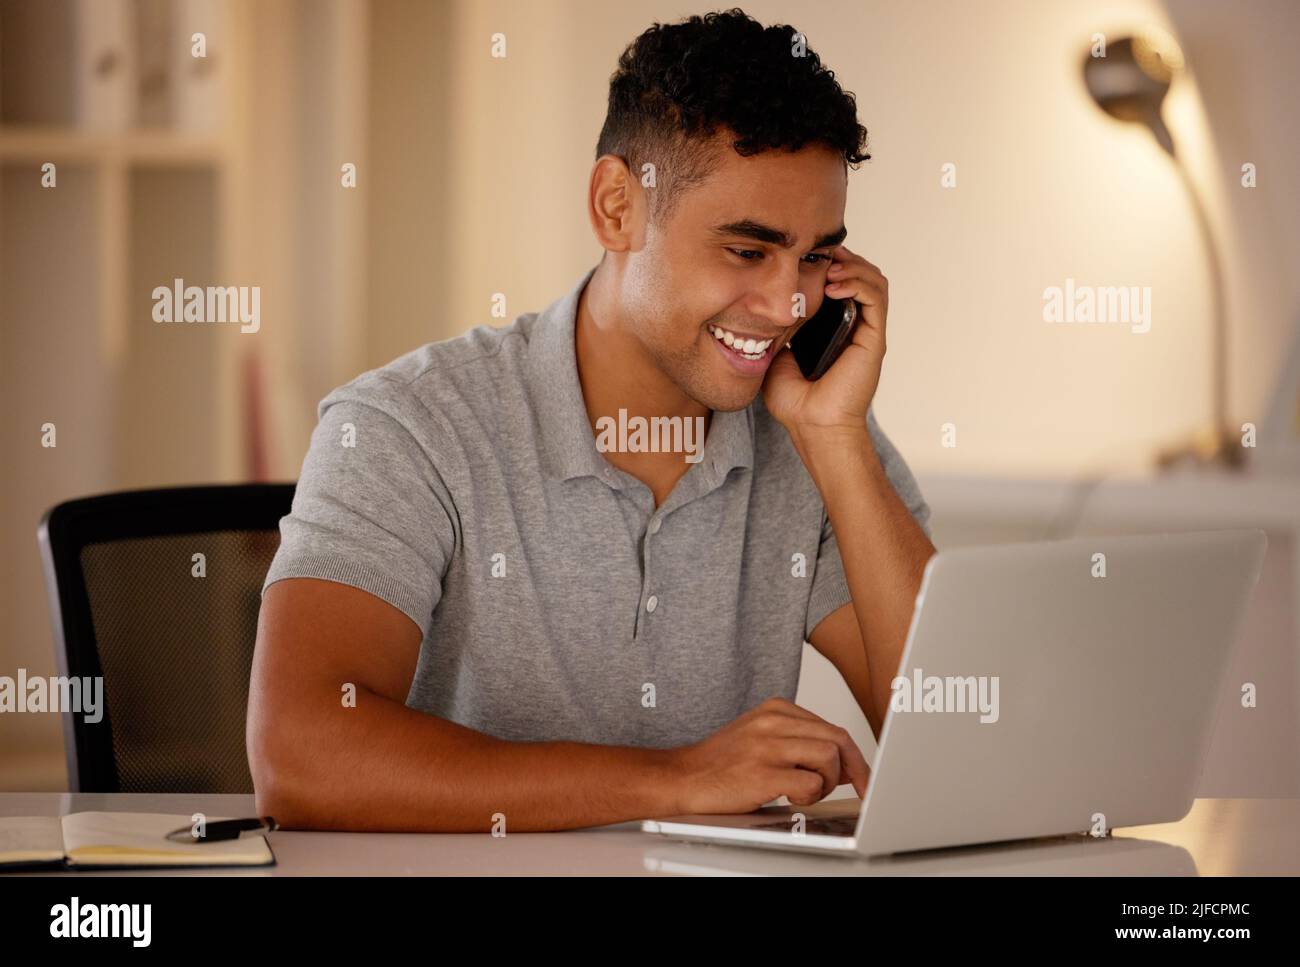 One young mixed race business man multitasking by talking on a cellphone and using a laptop to browse the internet. Happy, ambitious entrepreneur Stock Photo